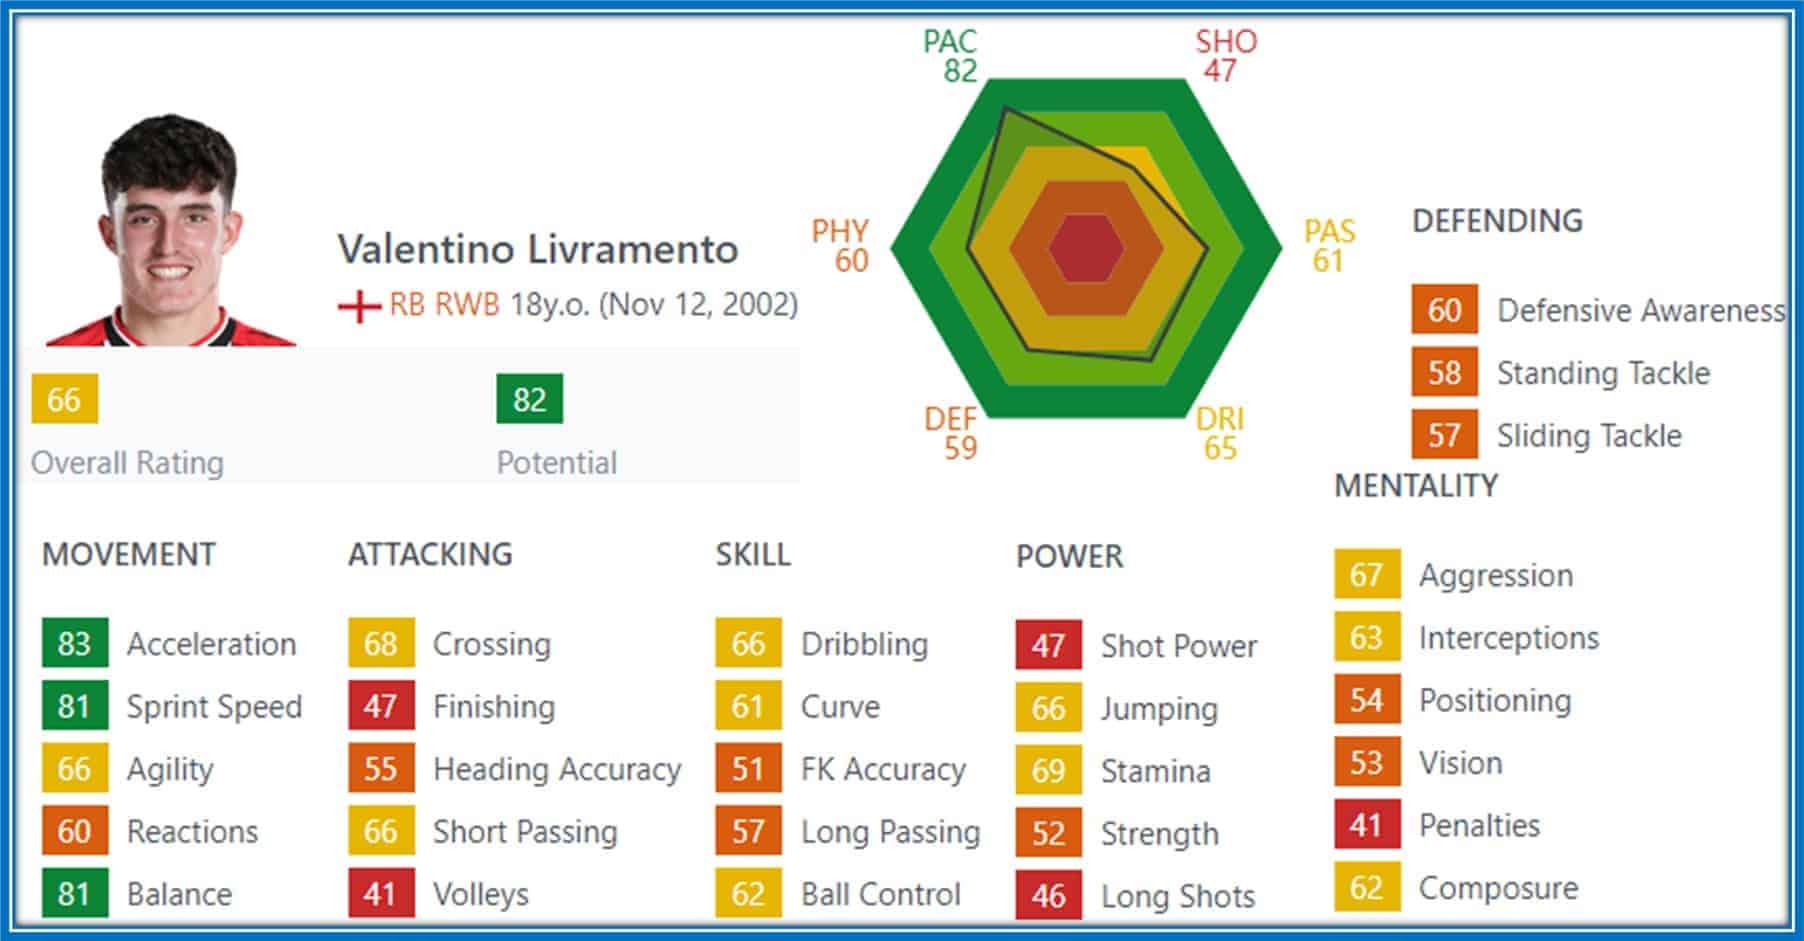 Although he is grossly underrated at 18, Valentino excels when it comes to acceleration, sprint speed and movement.